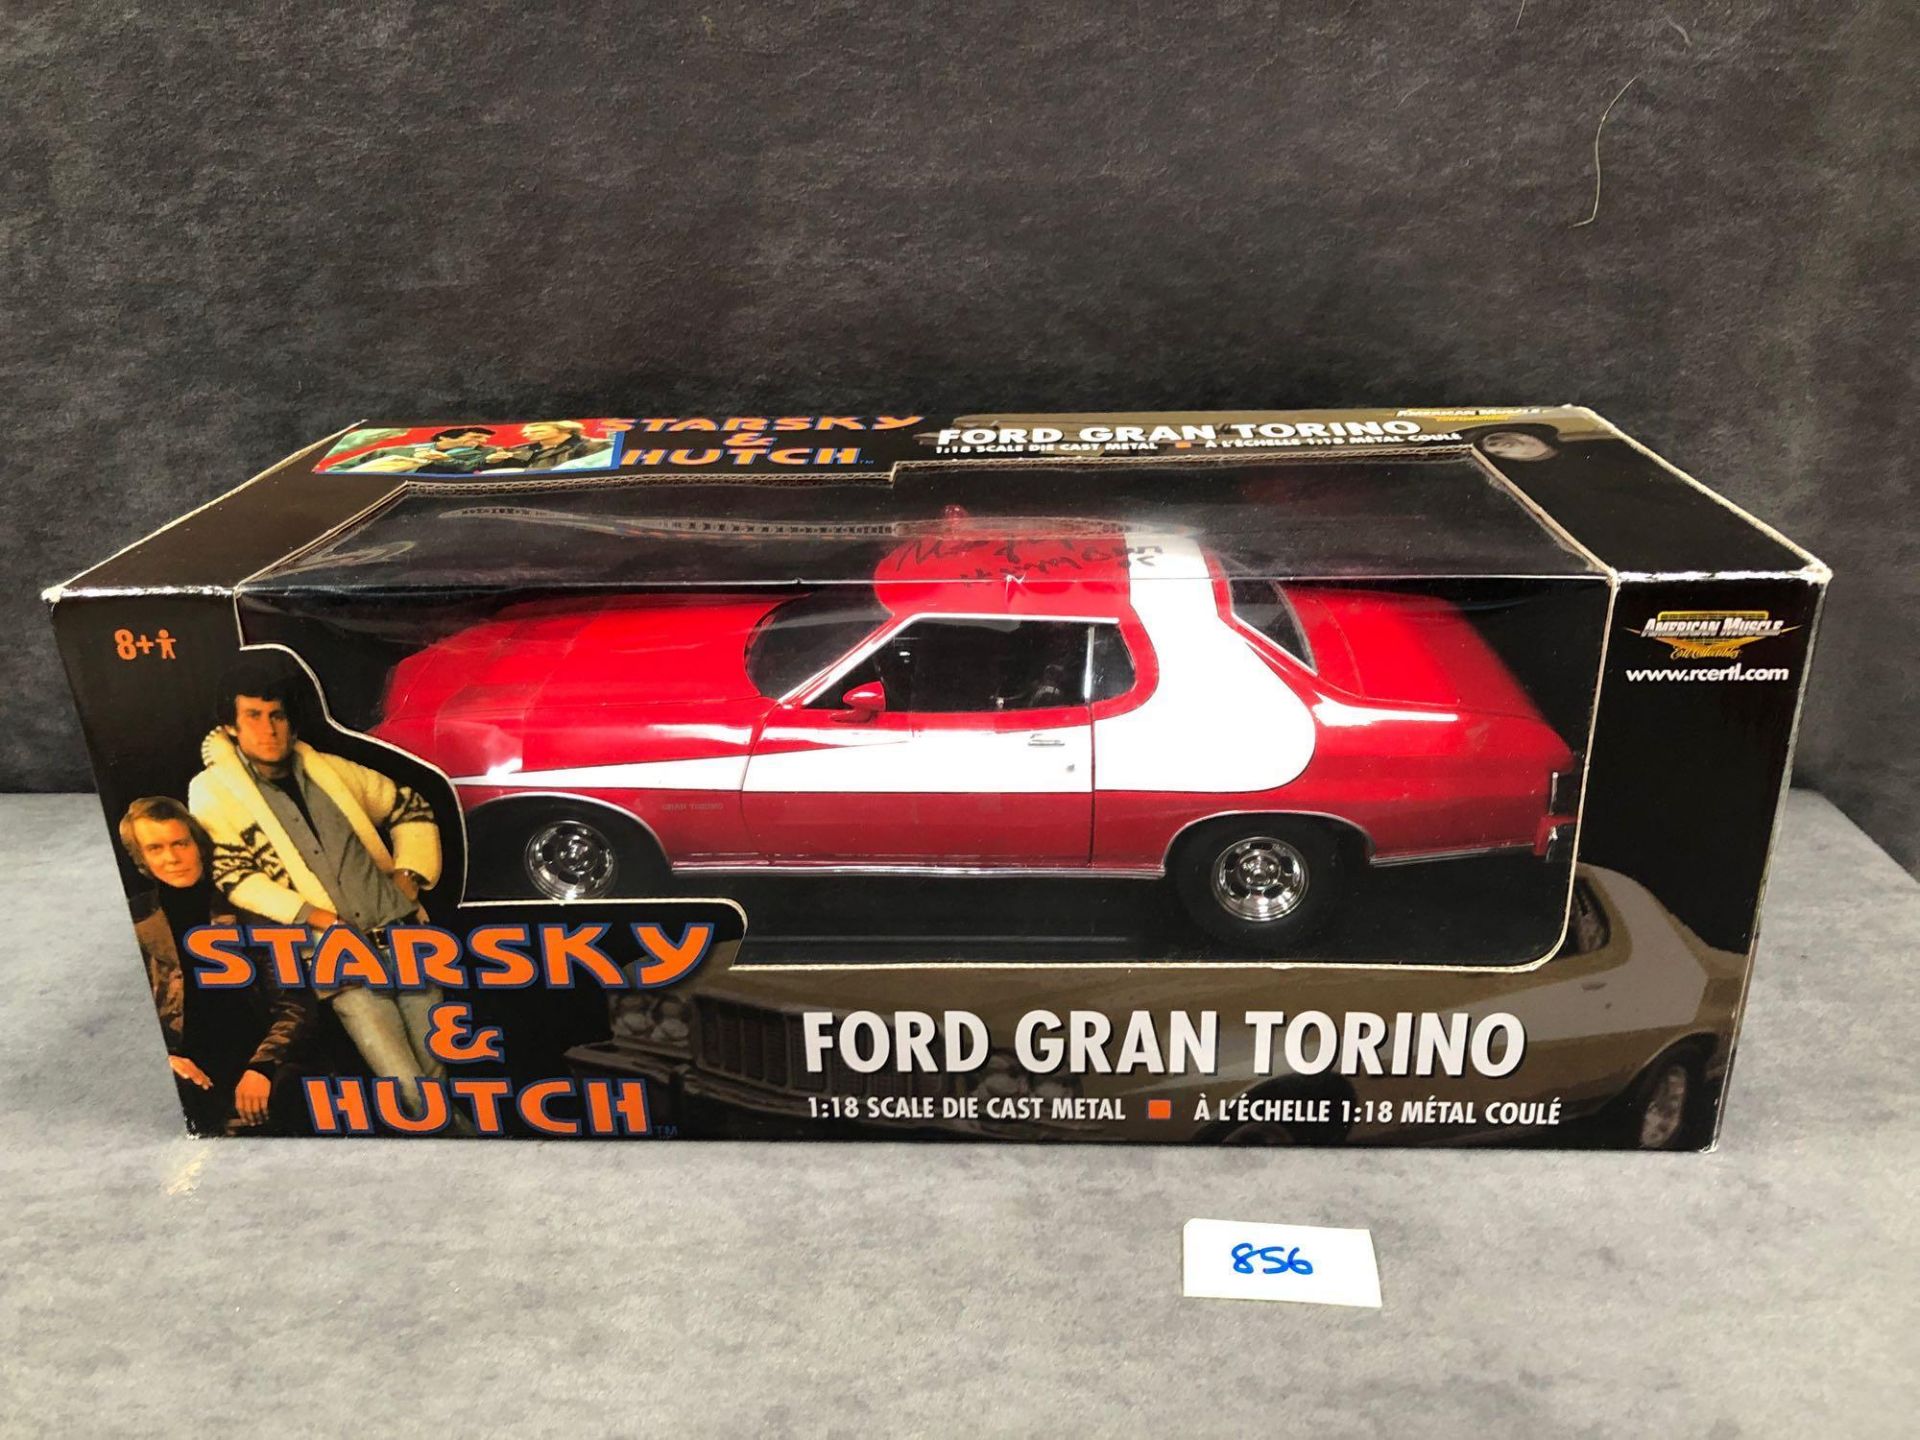 Signed by Antonio Fargus (Huggy Bear) American Muscle diecast 1/18 scale #36685 Starsky & Hutch